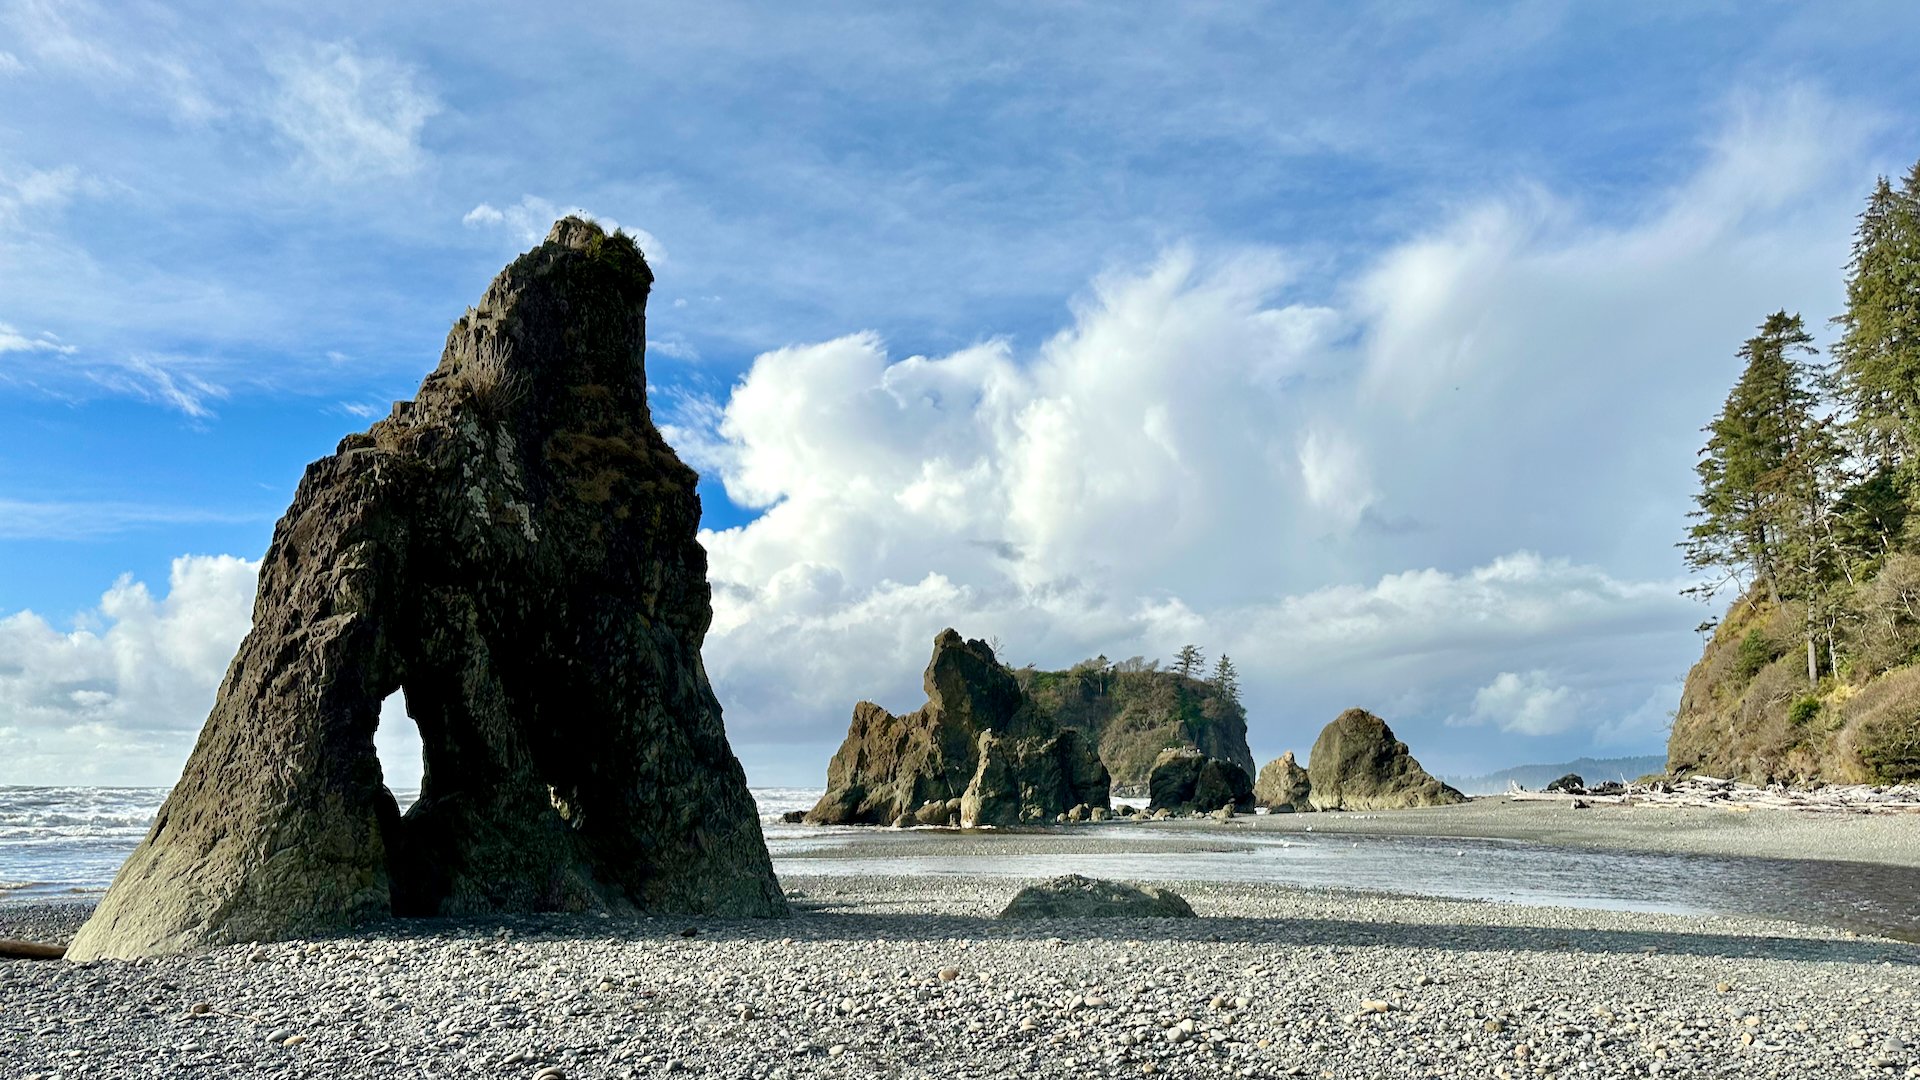  Ruby Beach has some pretty cool rock formations to explore. 